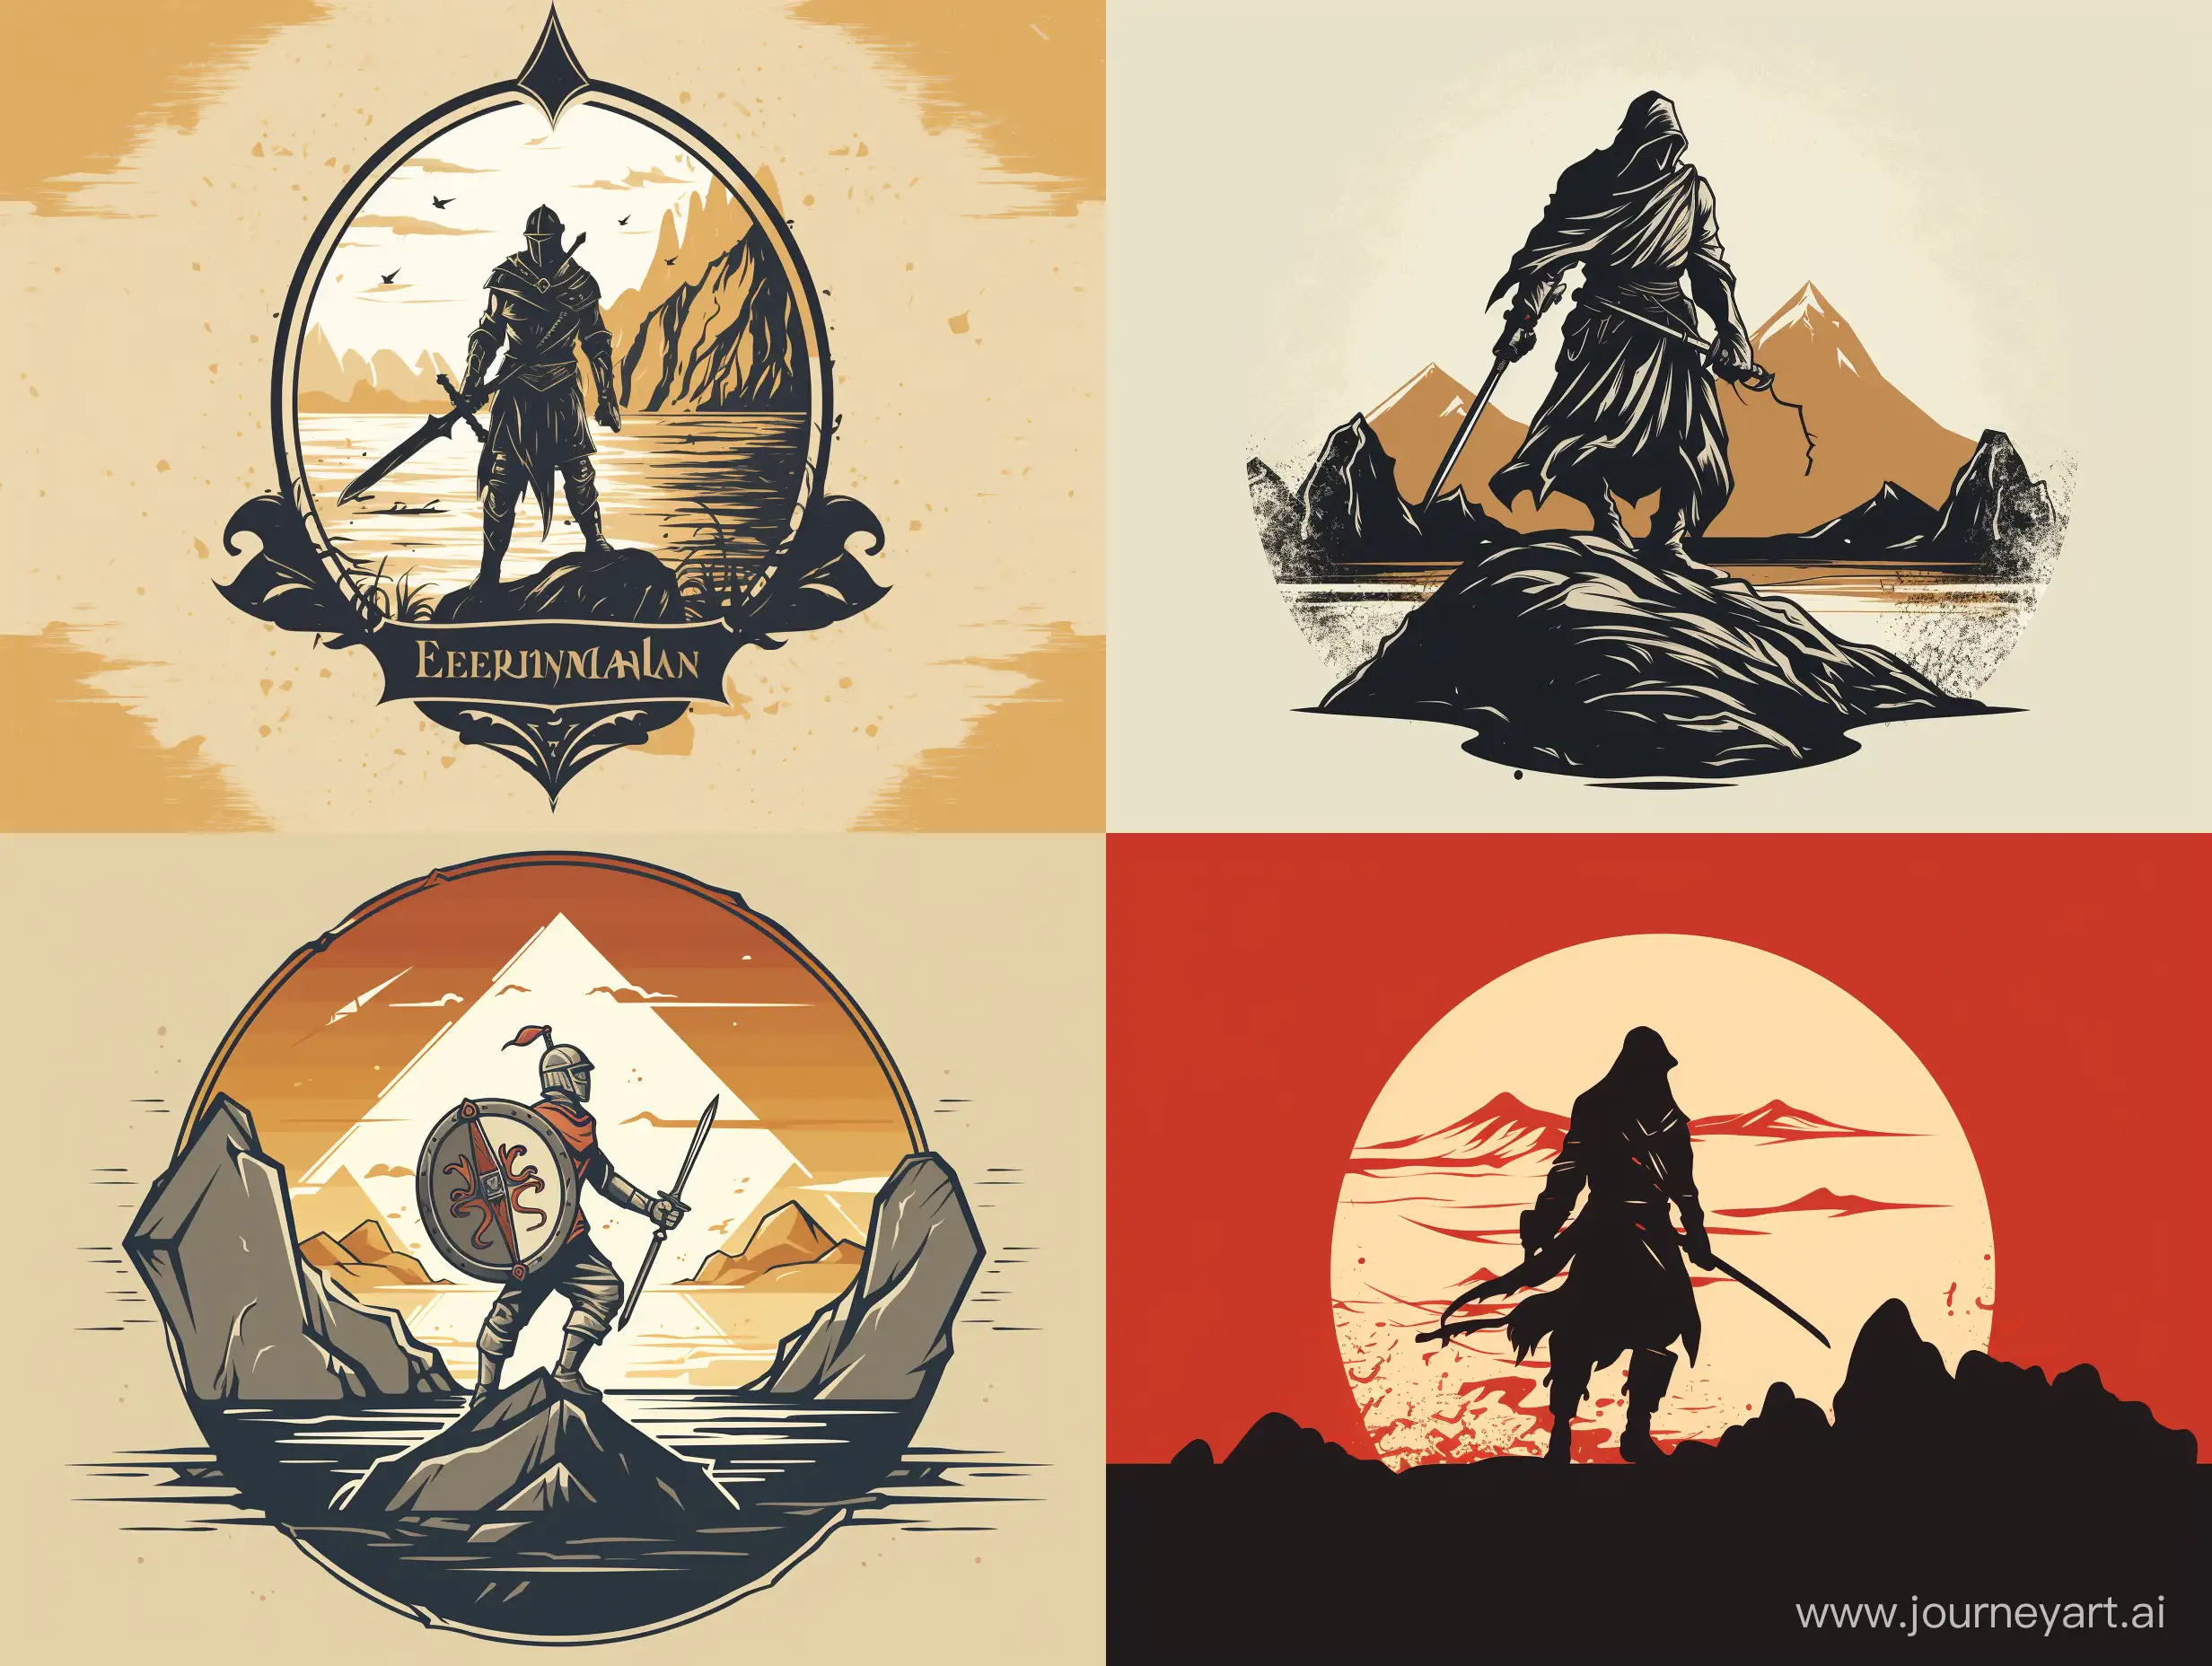 Design a seal-like logo for Debian Realms portraying a figure in exploration attire, holding a map, and standing against a medieval backdrop. Use earthy tones and strong lines to maintain a masculine and adventurous feel. Keep it elegant and straightforward.